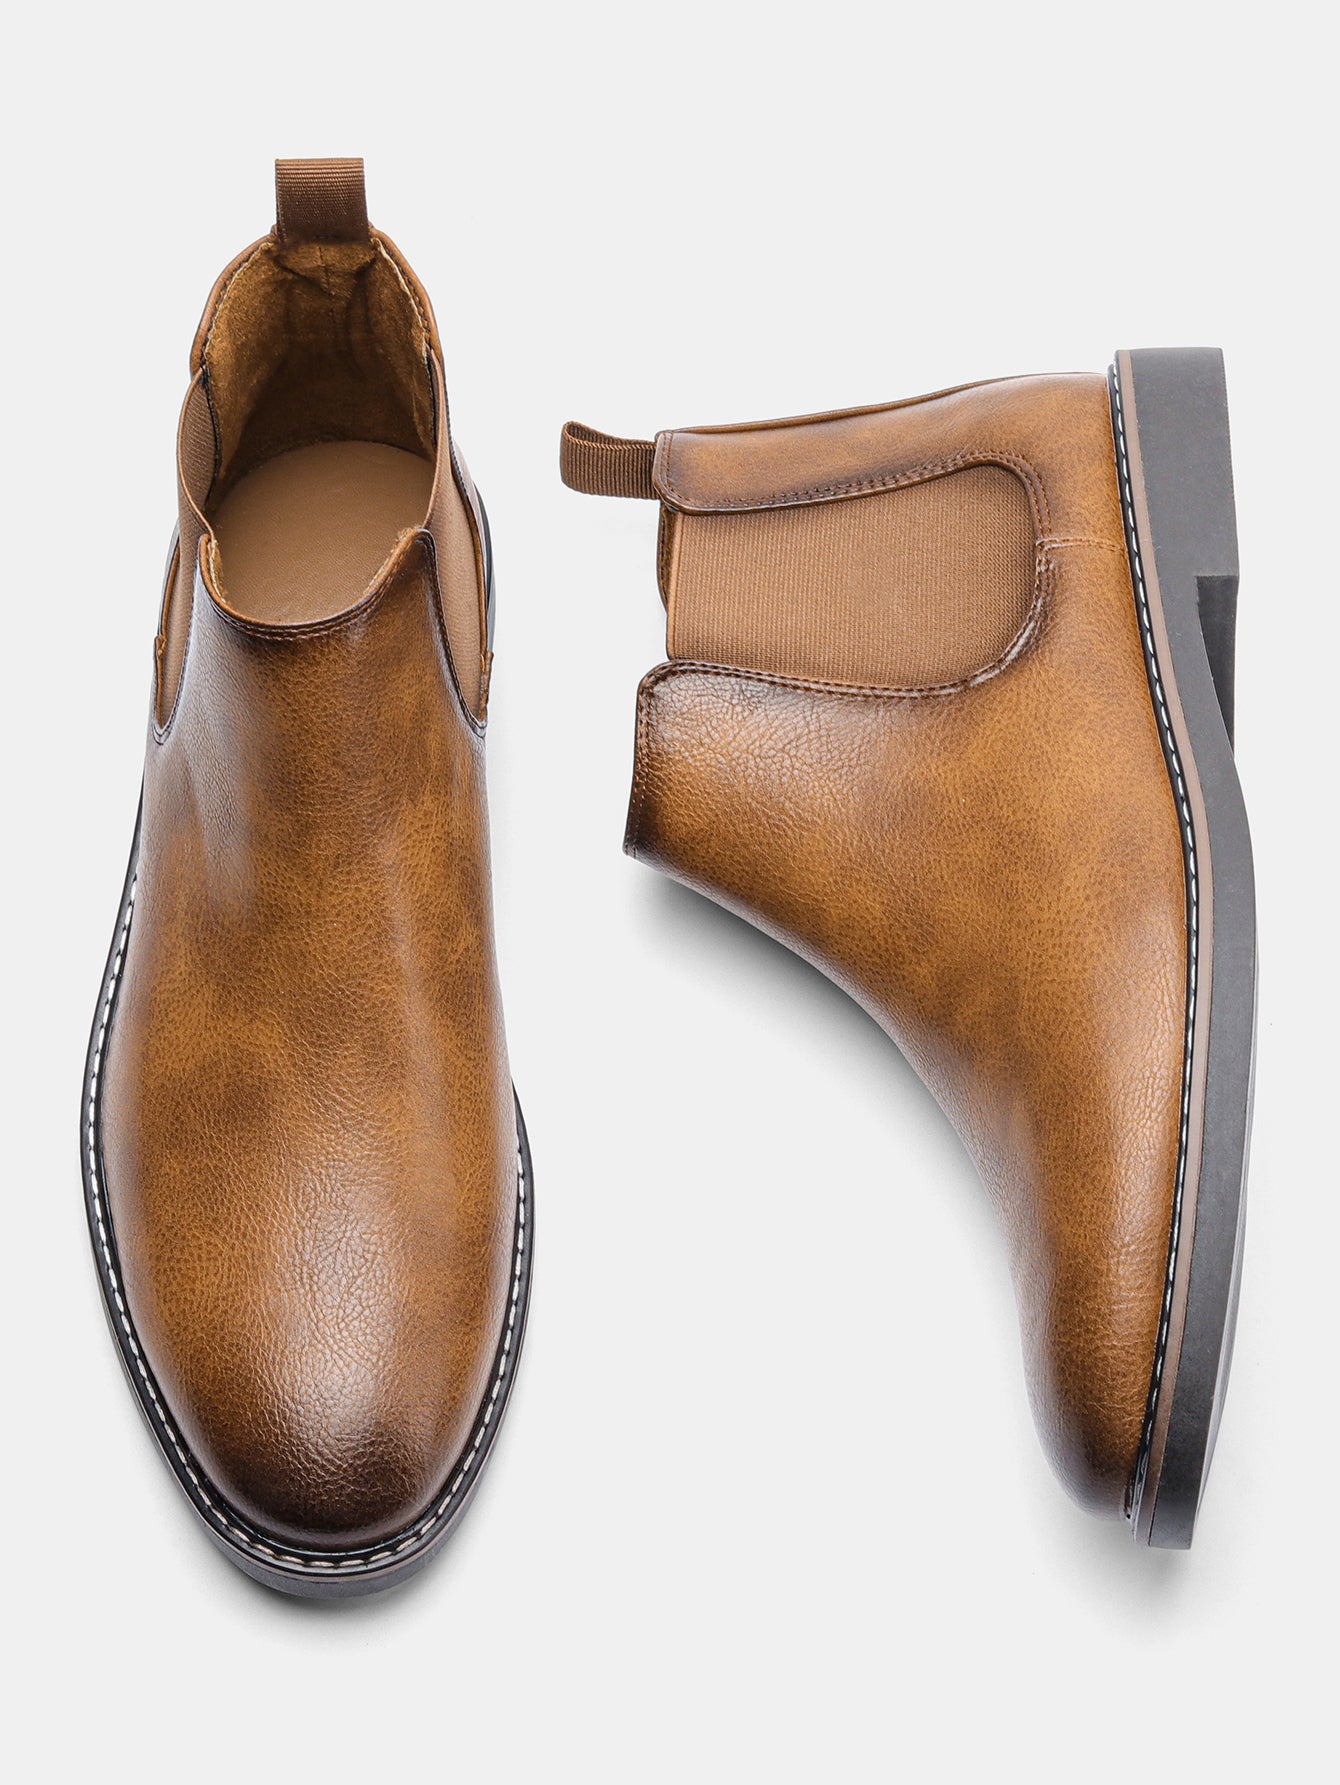 All time classics Chelsea Boots